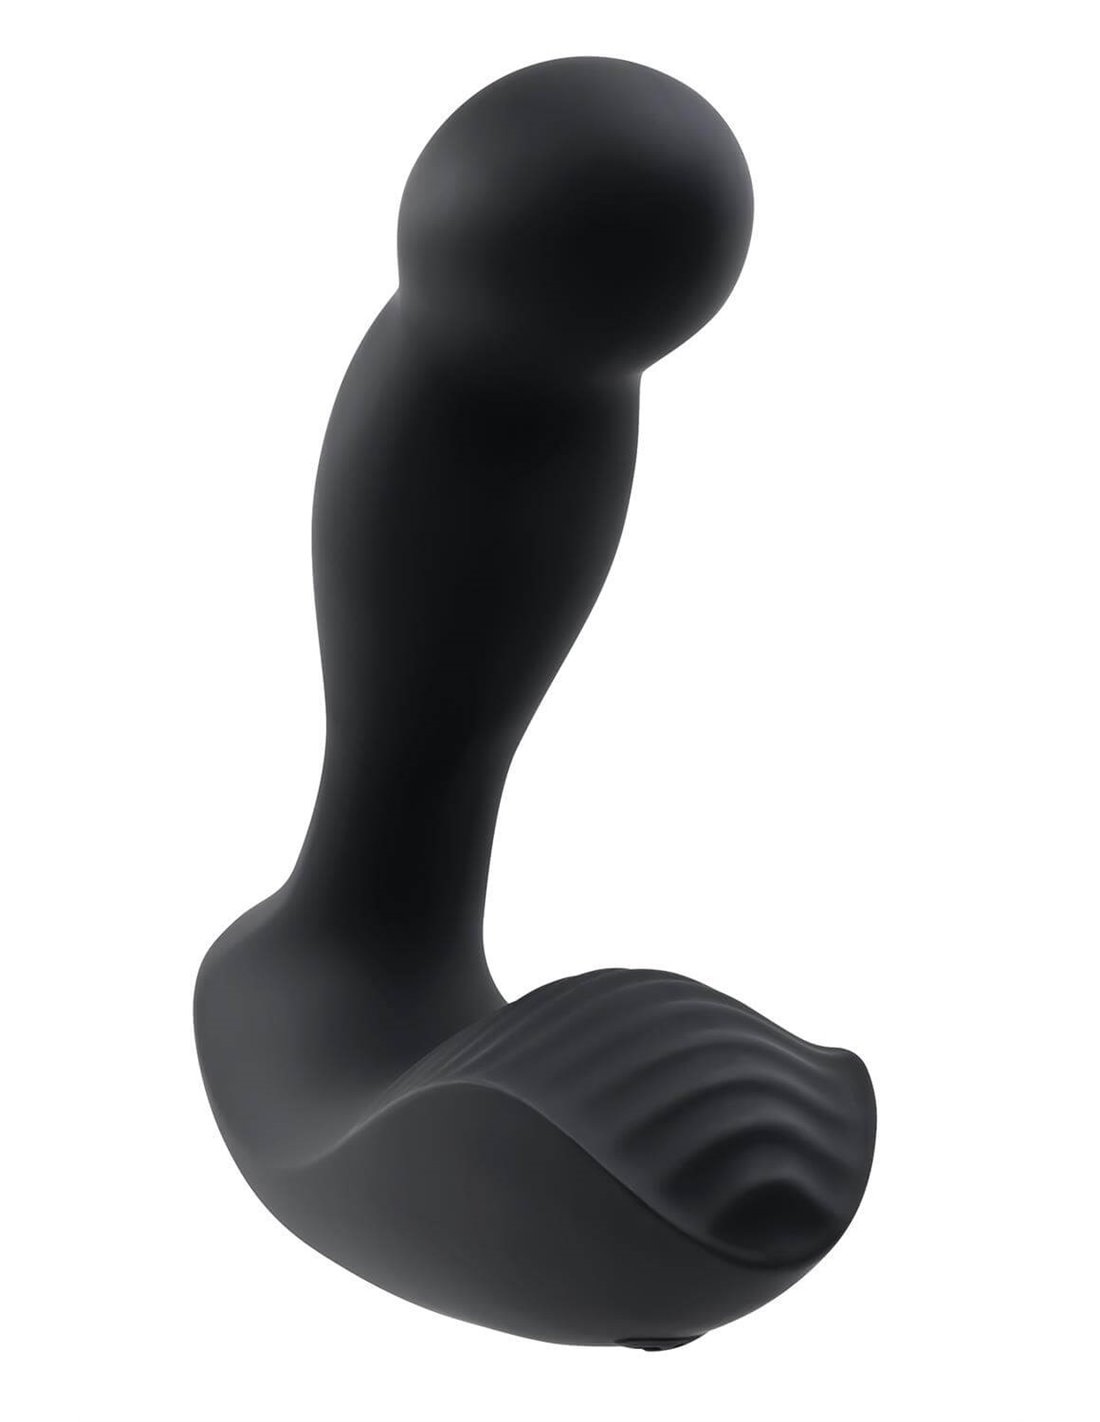 deborah angell recommends adam and eve prostate massager pic